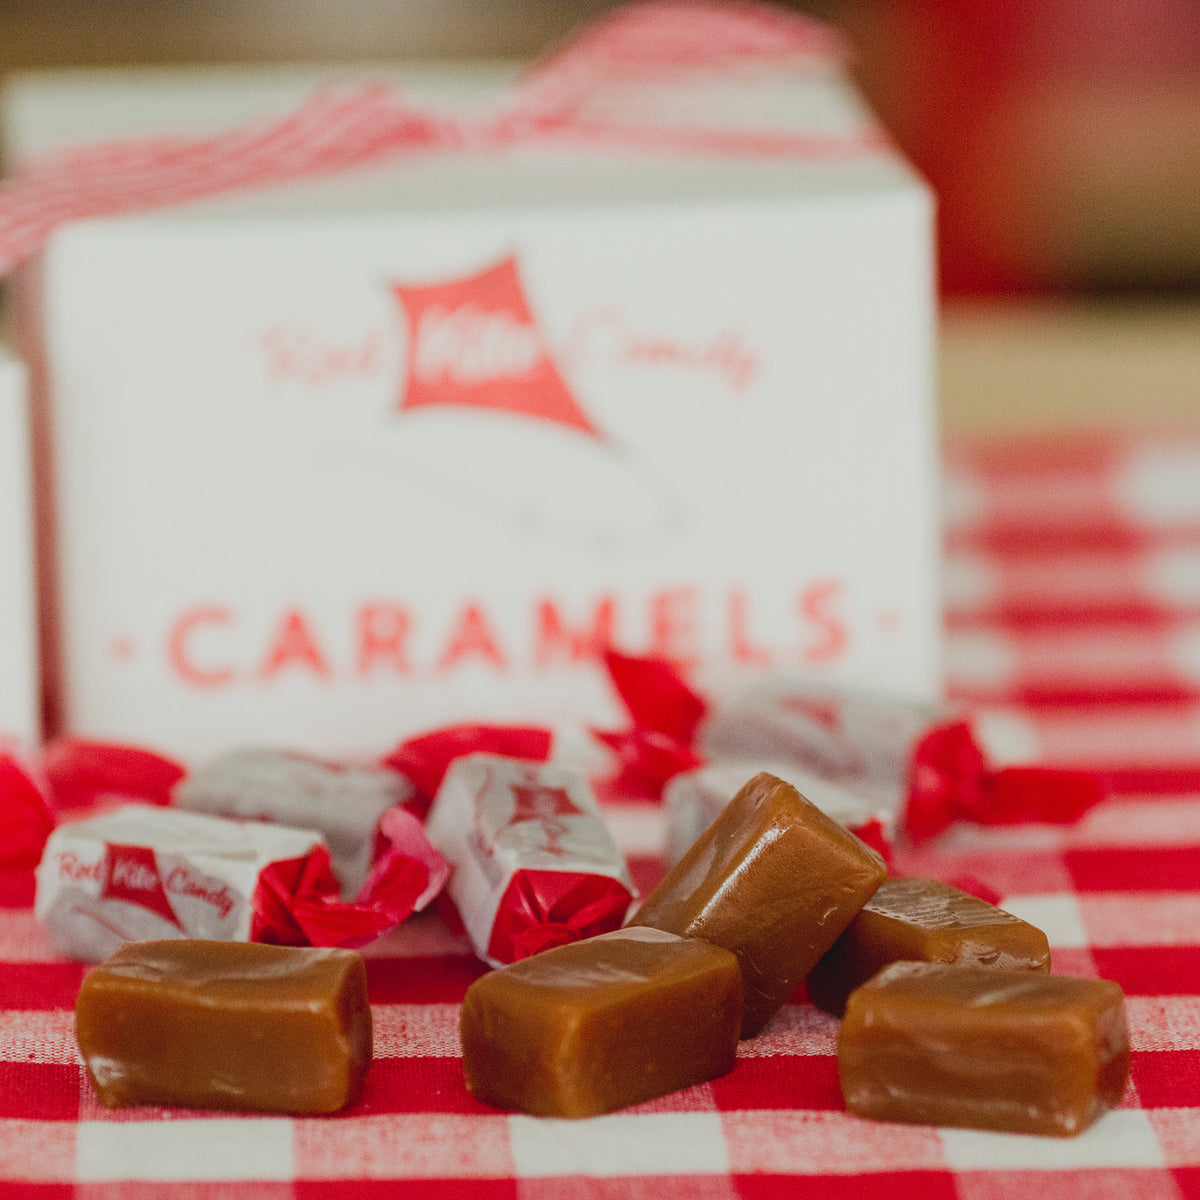 Crazy for Caramels Box. Send one to a caramel lover.